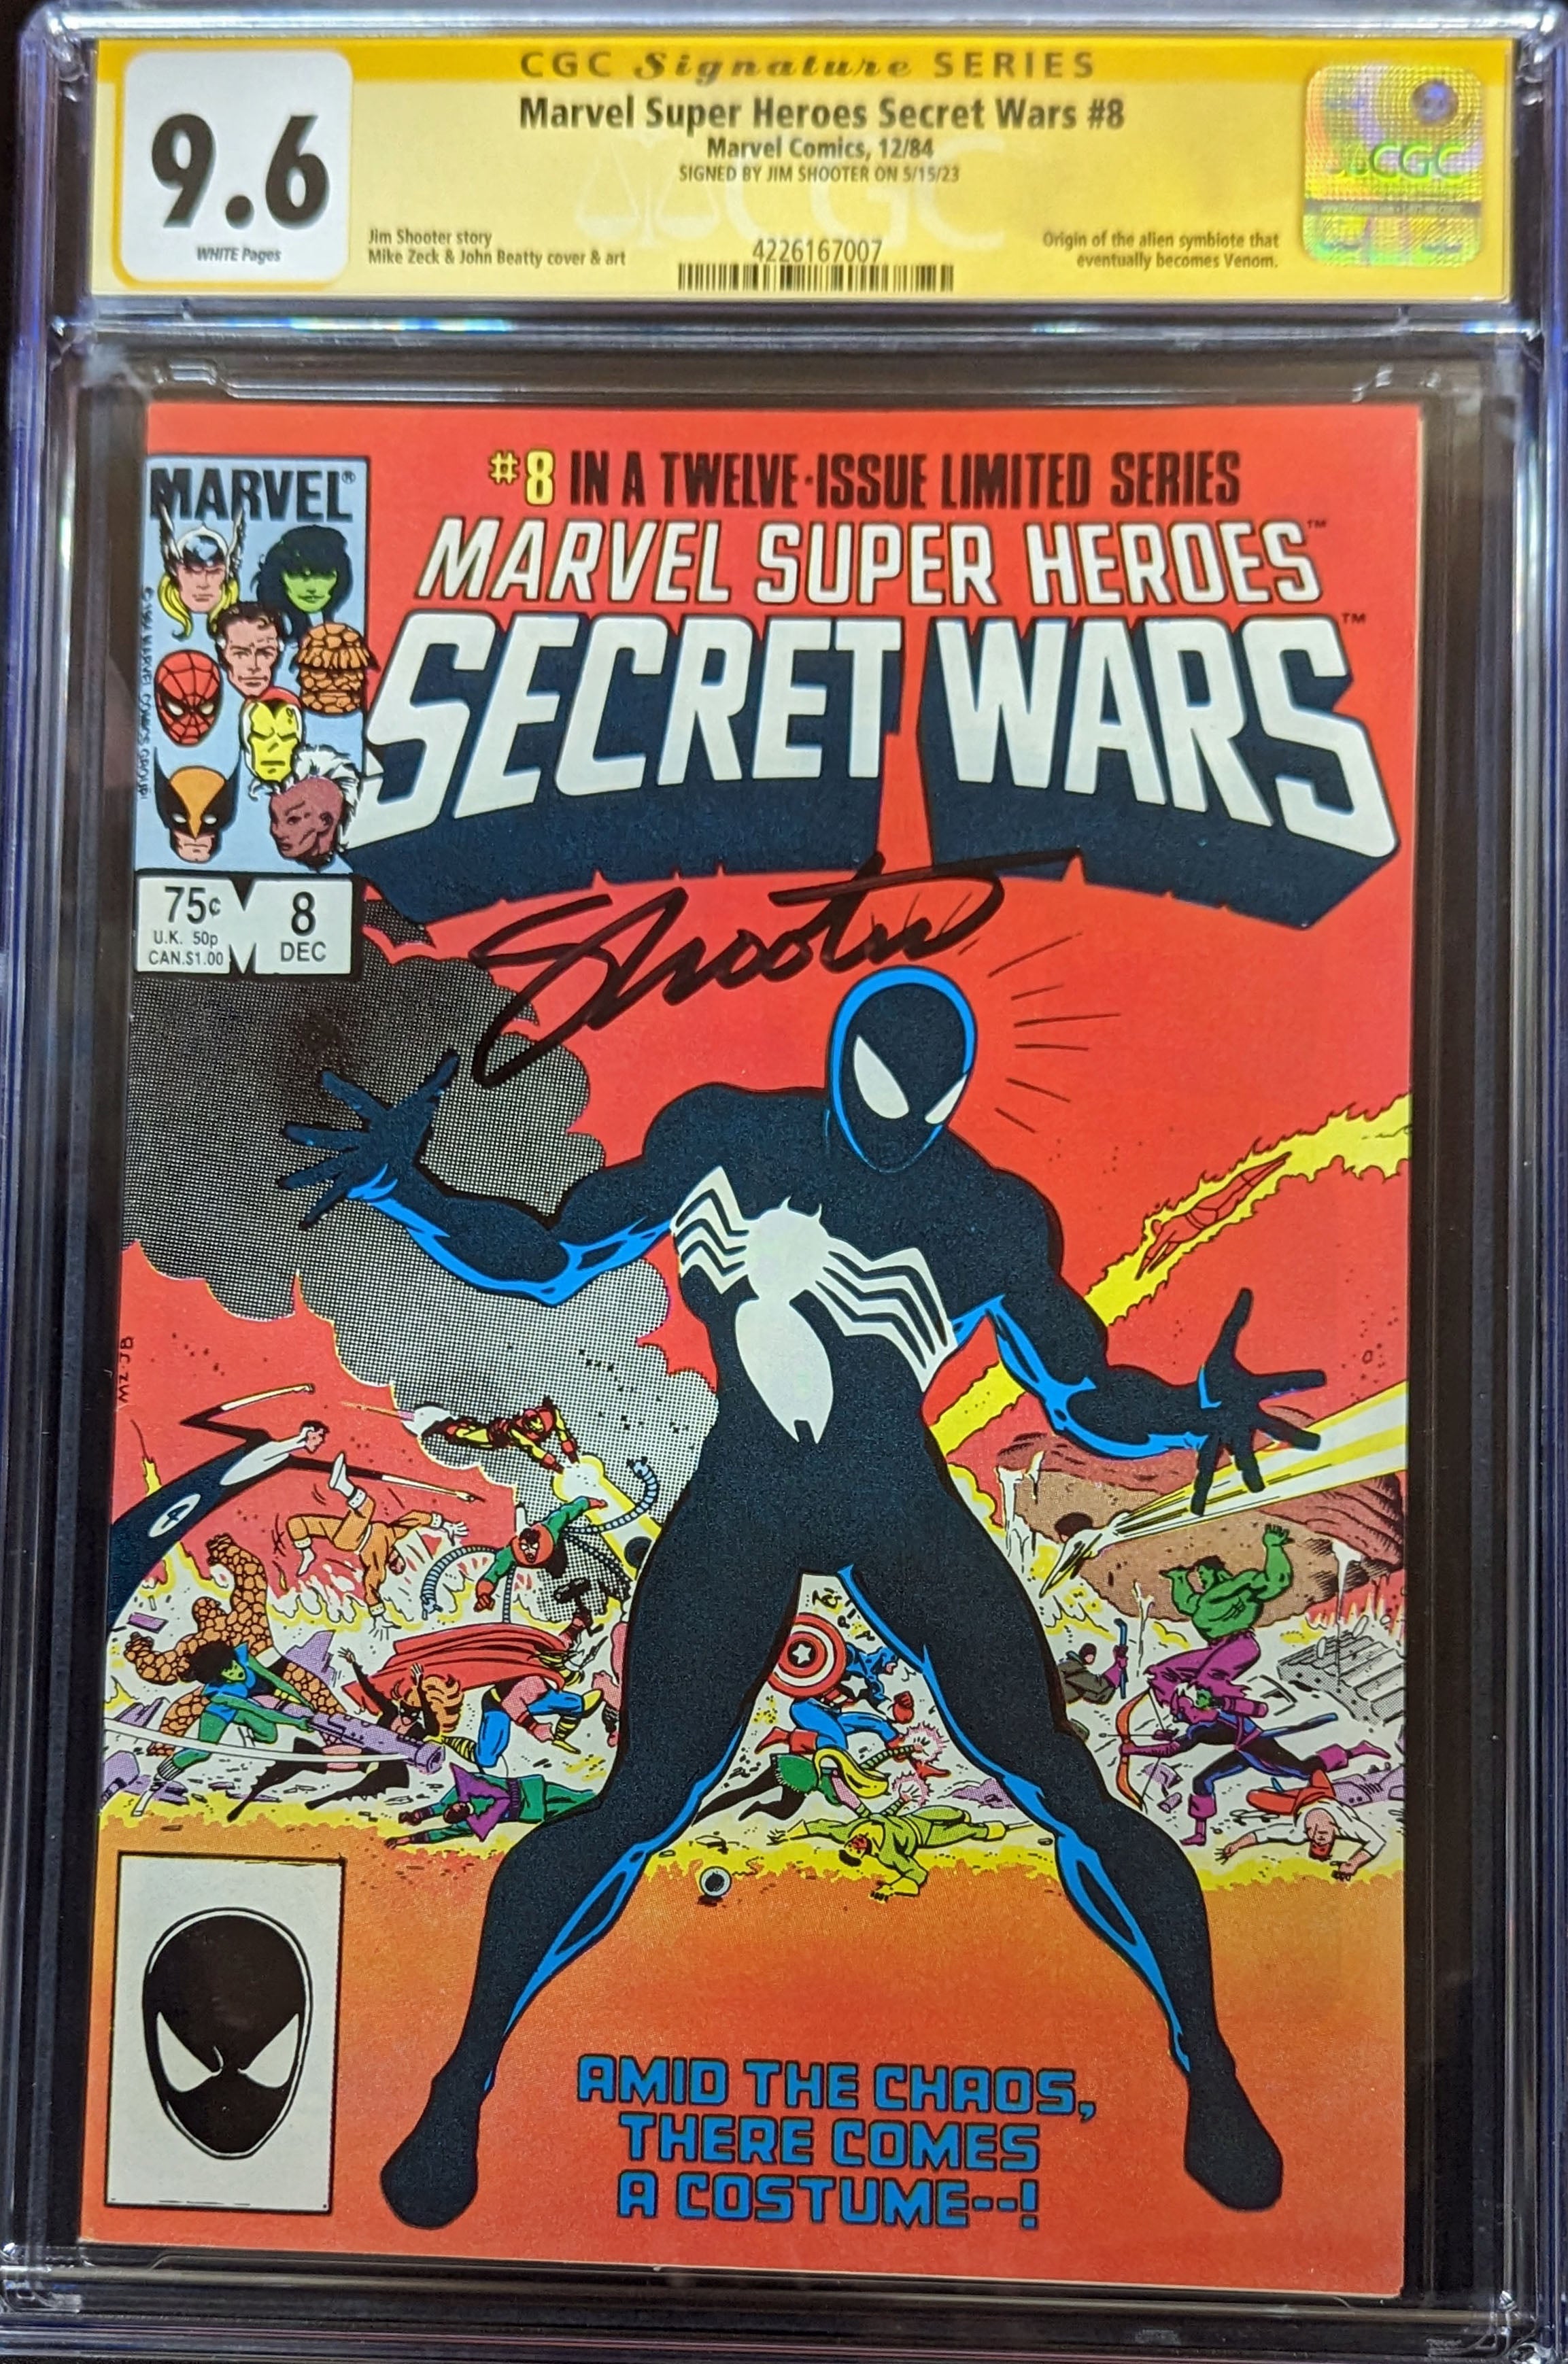 Secret Wars #8 (1984) CGC 9.6 Signed by Jim Shooter